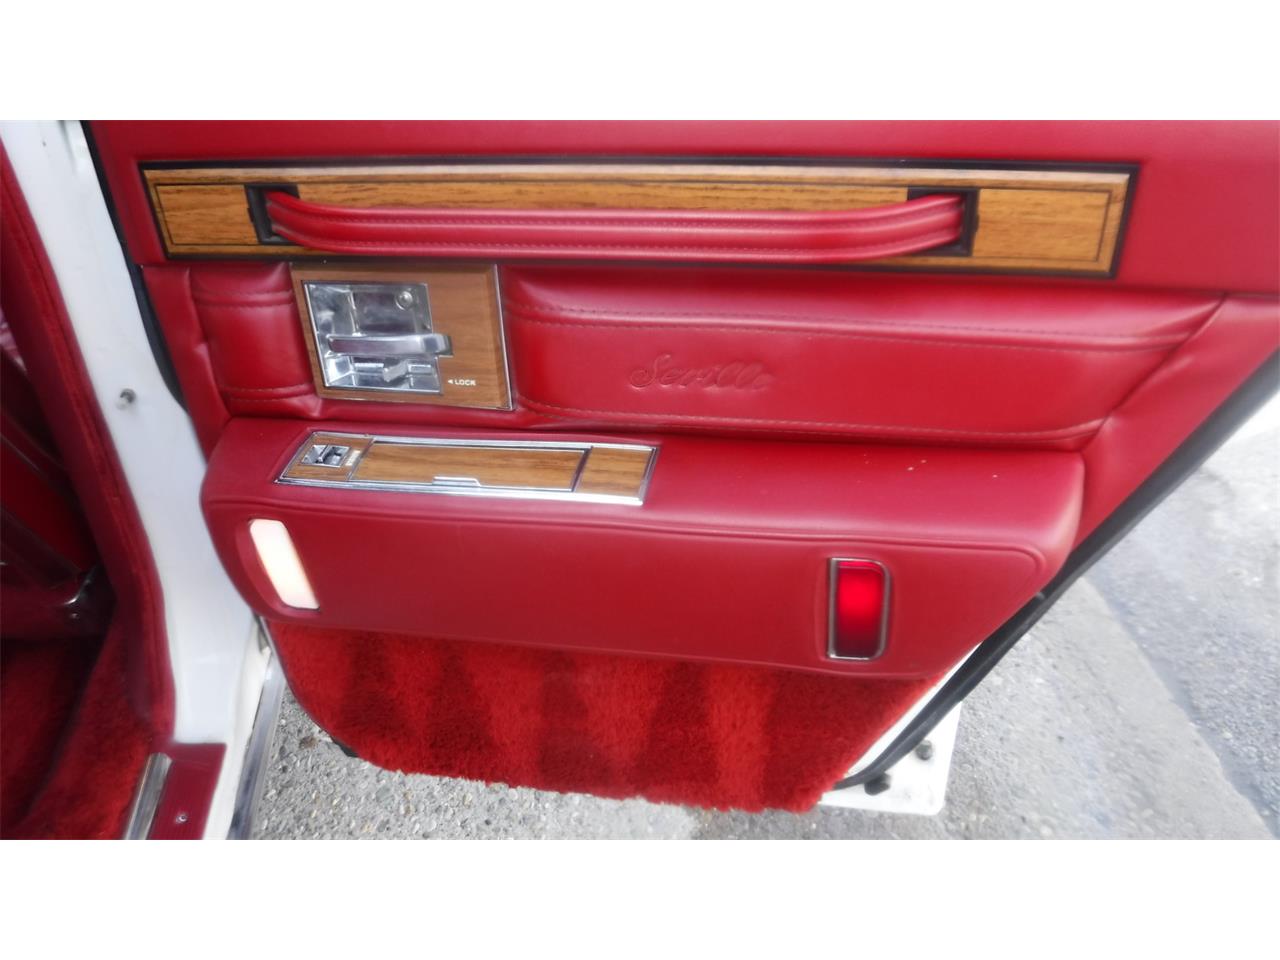 1985 Cadillac Seville for sale in Milford, OH – photo 76